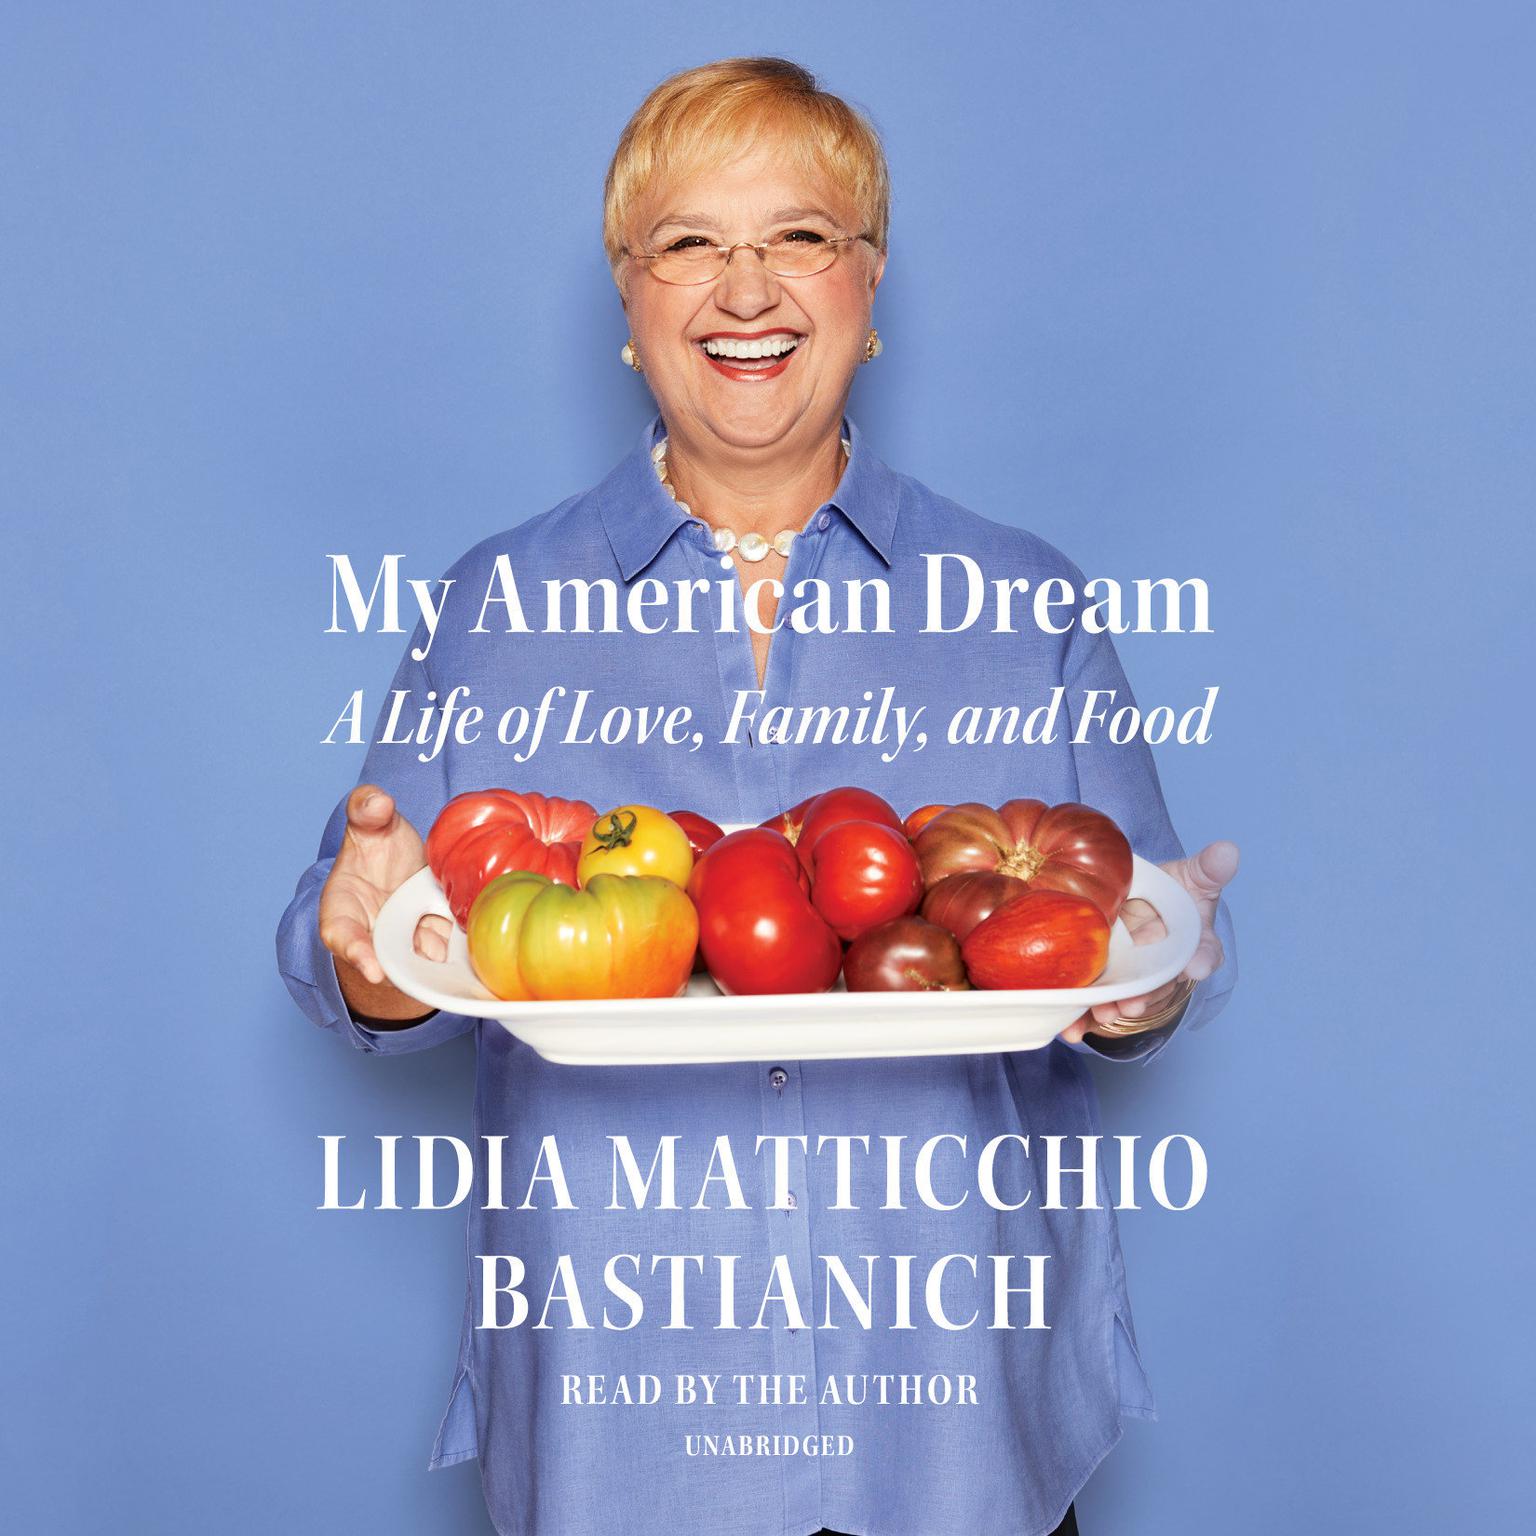 My American Dream: A Life of Love, Family, and Food Audiobook, by Lidia Matticchio Bastianich